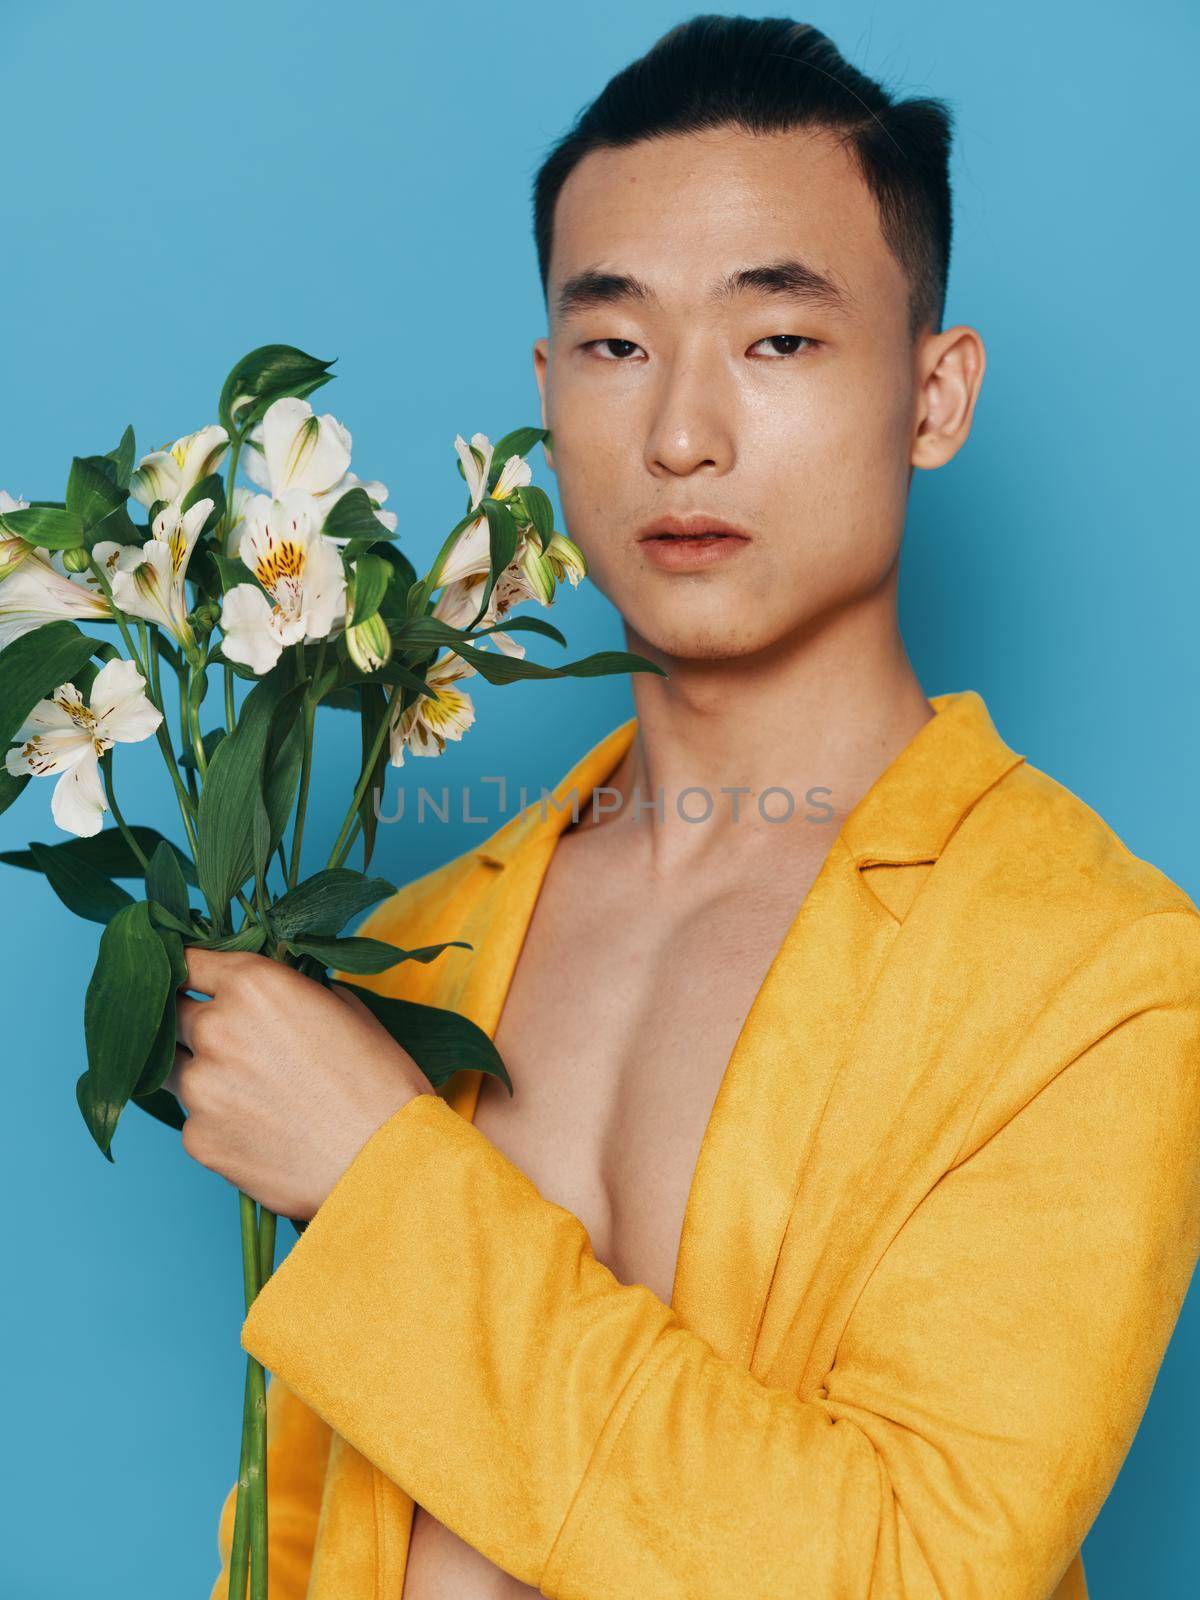 A romantic guy in an unbuttoned coat, Asian appearance and a bouquet of flowers in his hand by SHOTPRIME